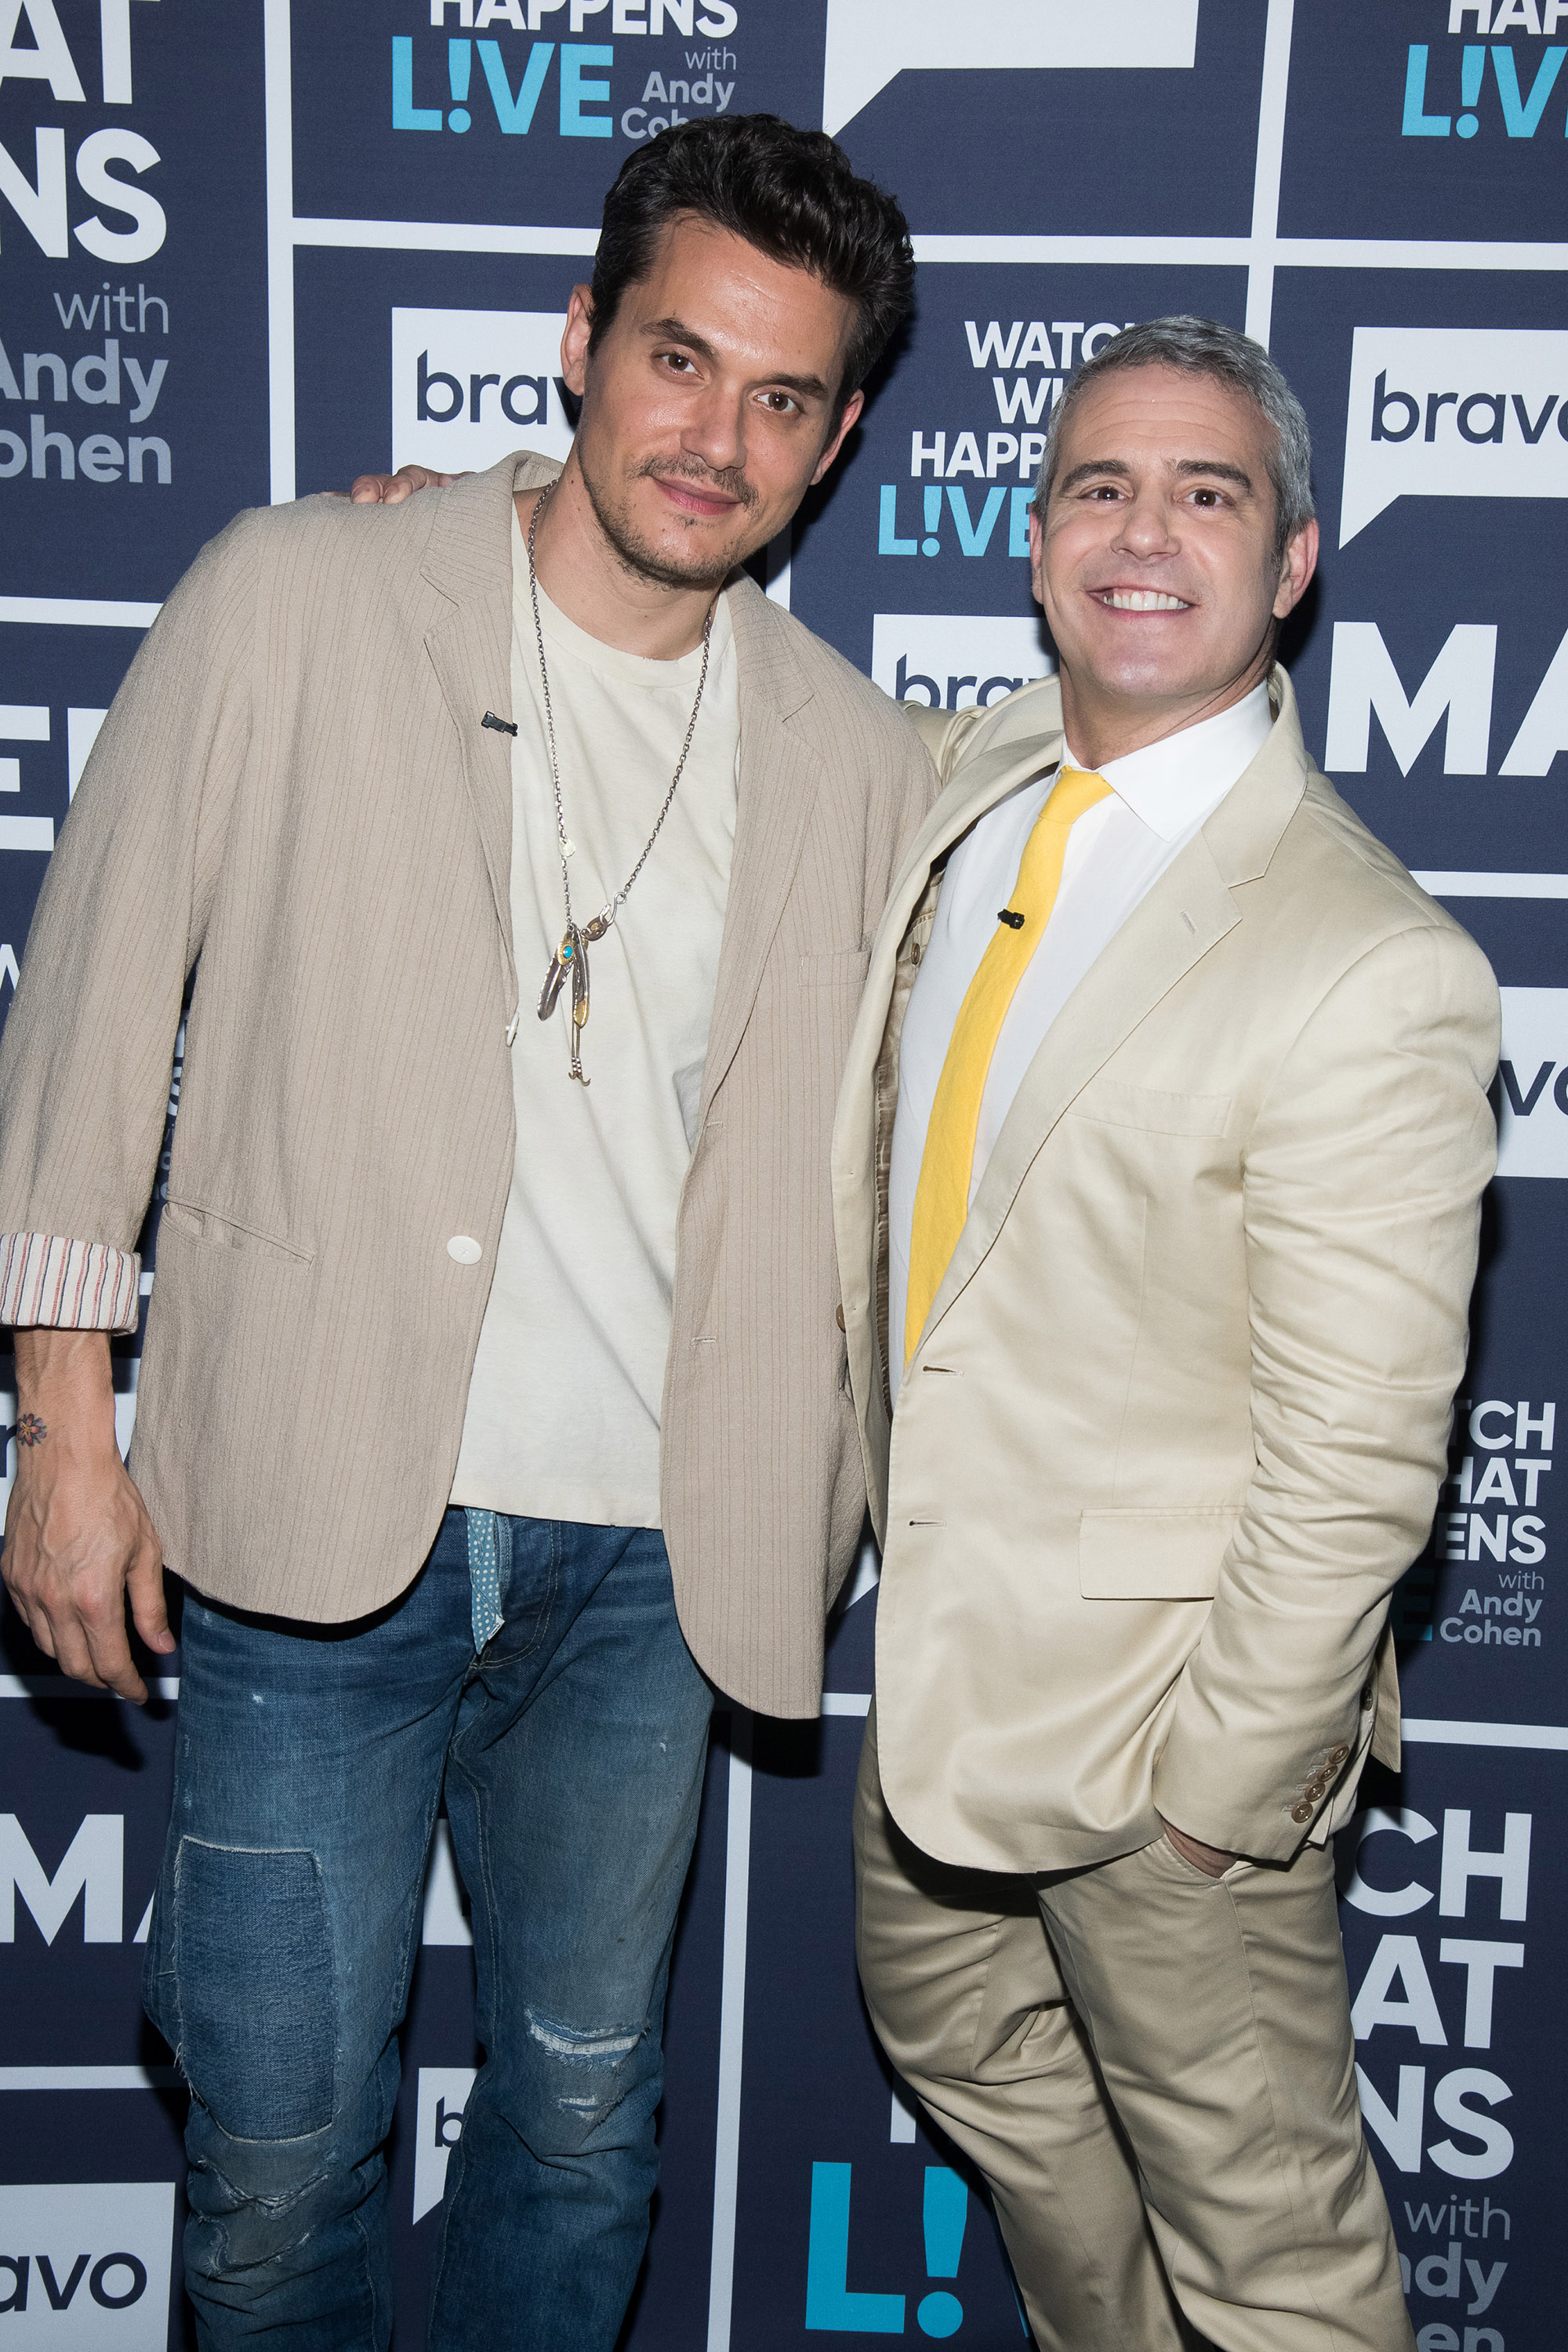 John Mayer and Andy Cohen on season 16 of "Watch What Happens Live With Andy Cohen" on June 27, 2019 | Source: Getty Images